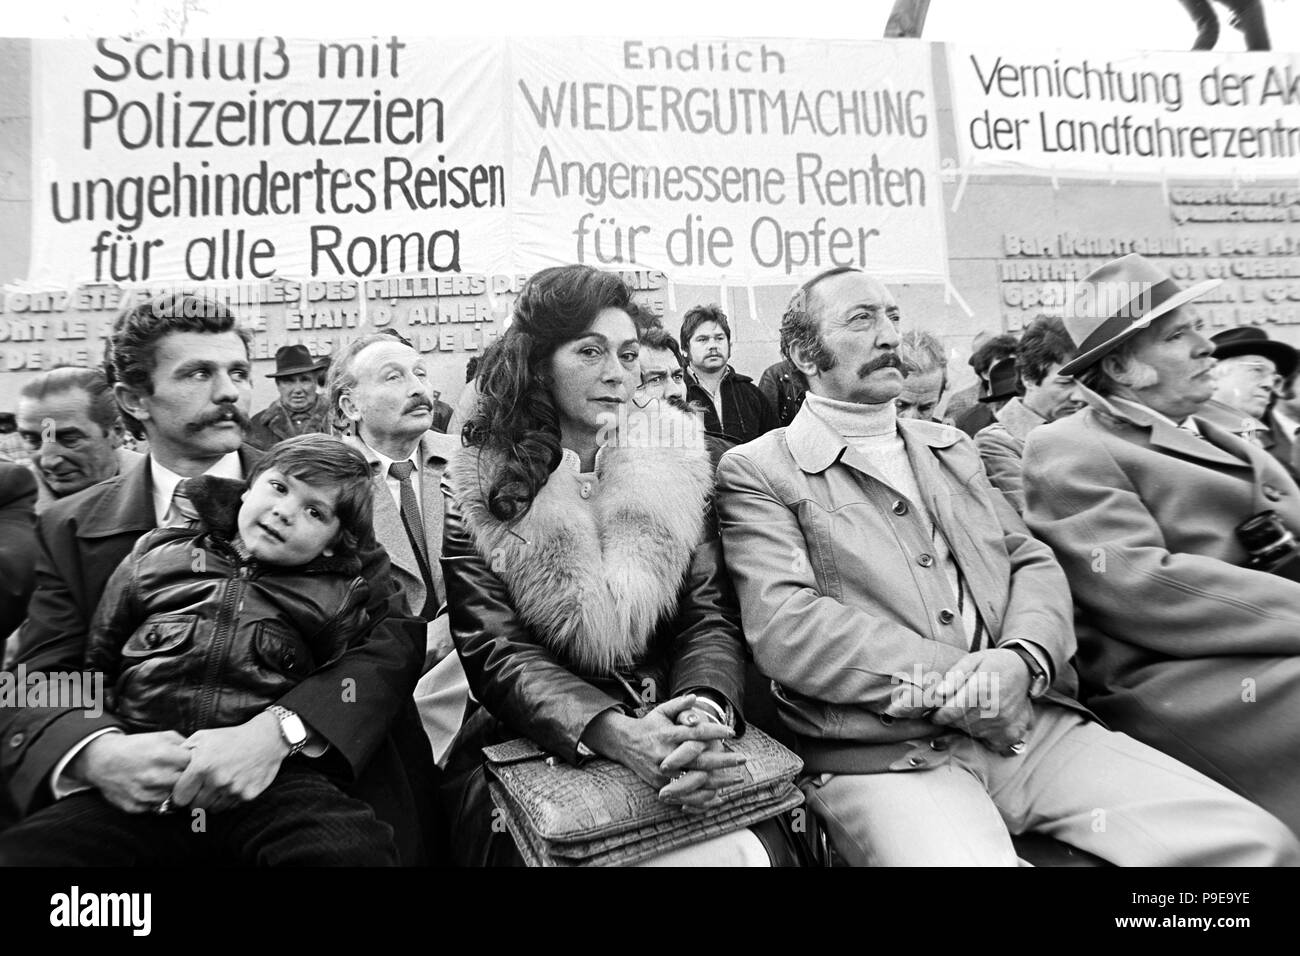 Bergen-Belsen, Germany, 27.10.1979 - Memorial event to the persecution of Sinti and Roma in the Third Reich in the memorial of the Bergen-Belsen concentration camp (digital image from a b/w-film-negative) Stock Photo